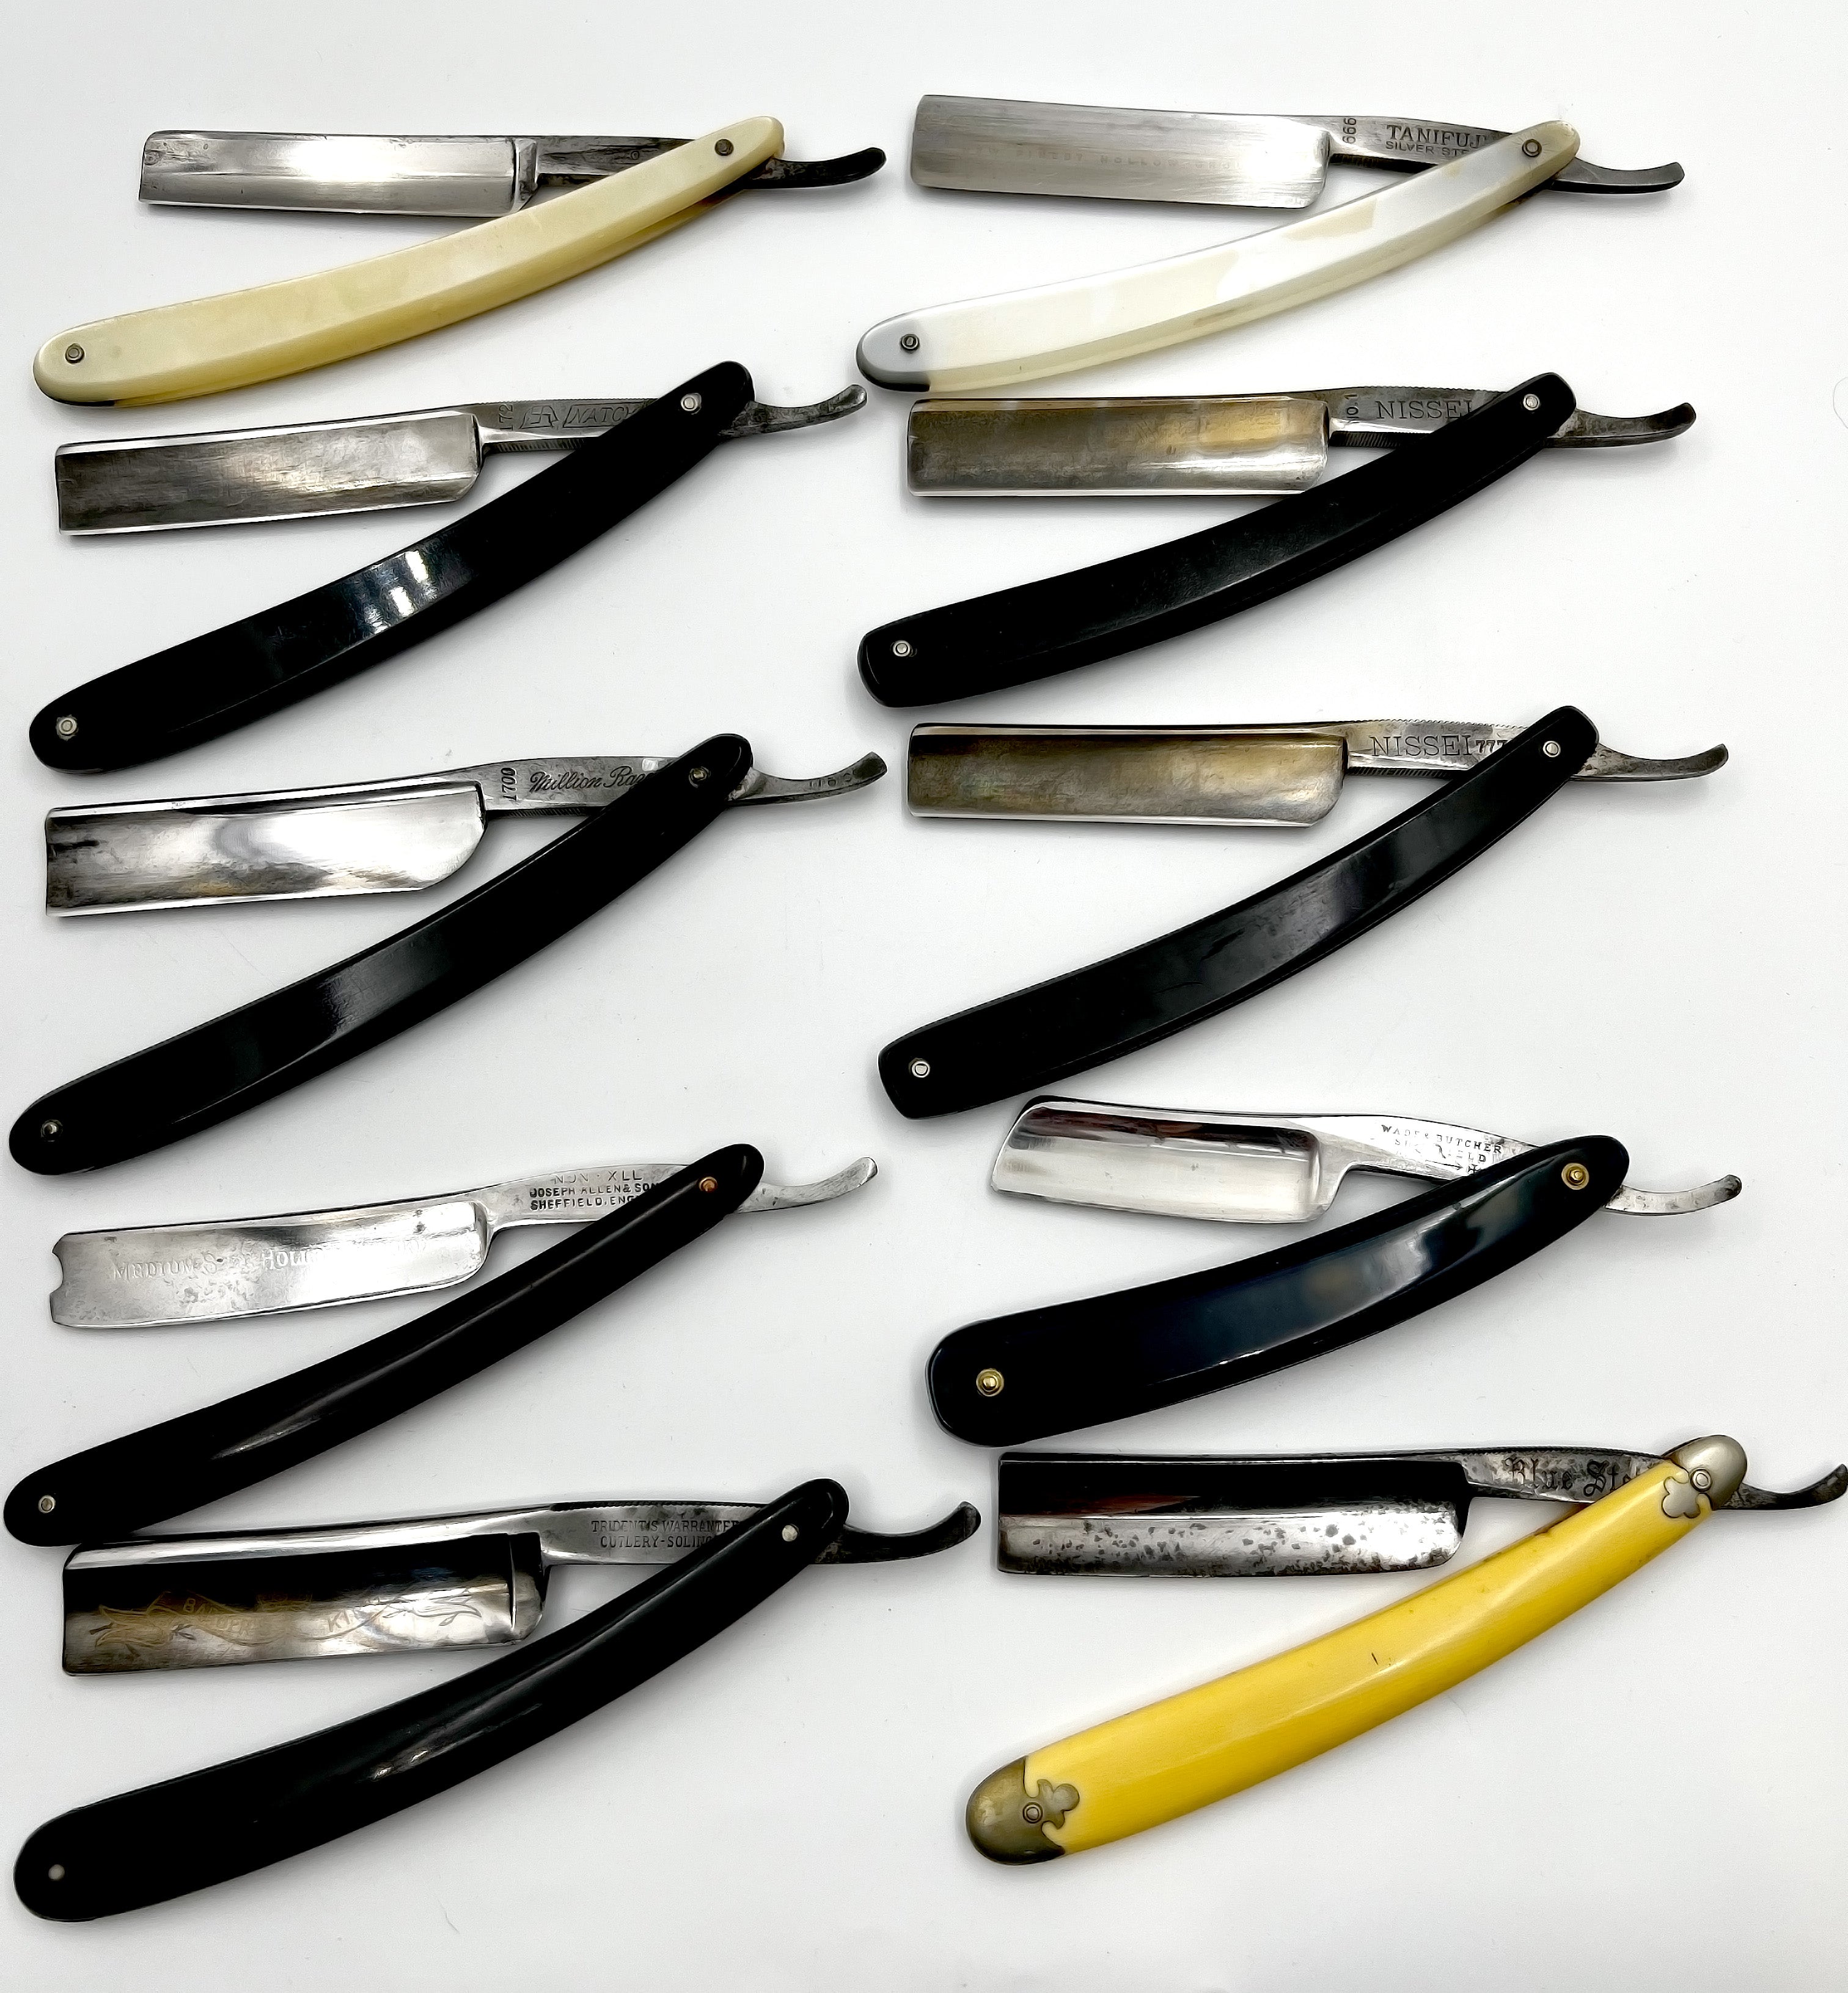 Vintage 10 Straight Razor Lot #37 - May Contain Sheffield, Solingen & USA makers, as pictured